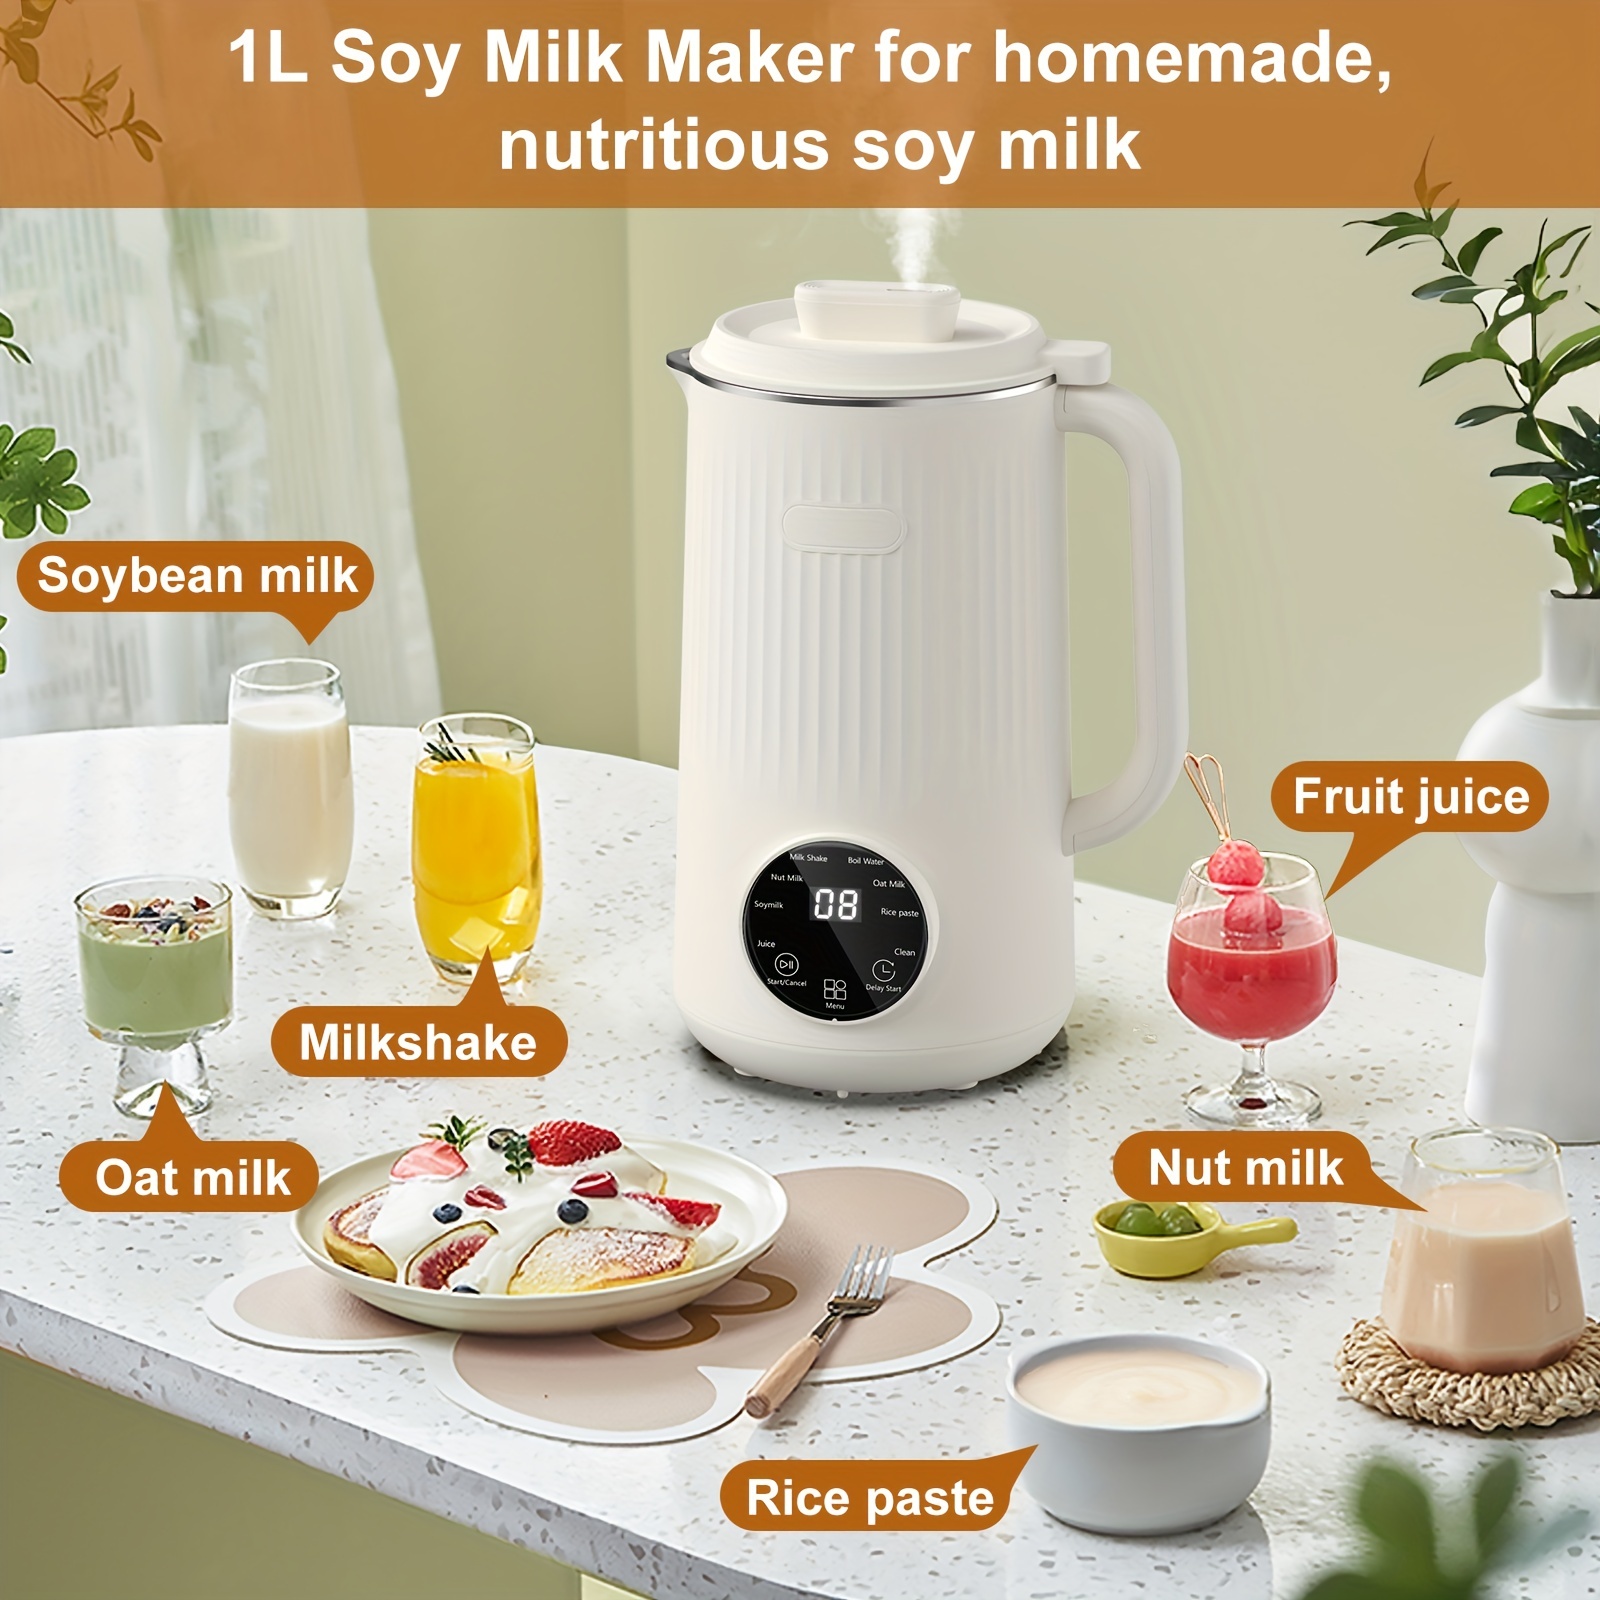 Beeze Automatic Nut Milk Maker Machine - Make Almond, Soy, Oat, Cashew, Coconut Milk - Glass Blender, Built in Strainer, Smart Touch, 12-Hour Delay